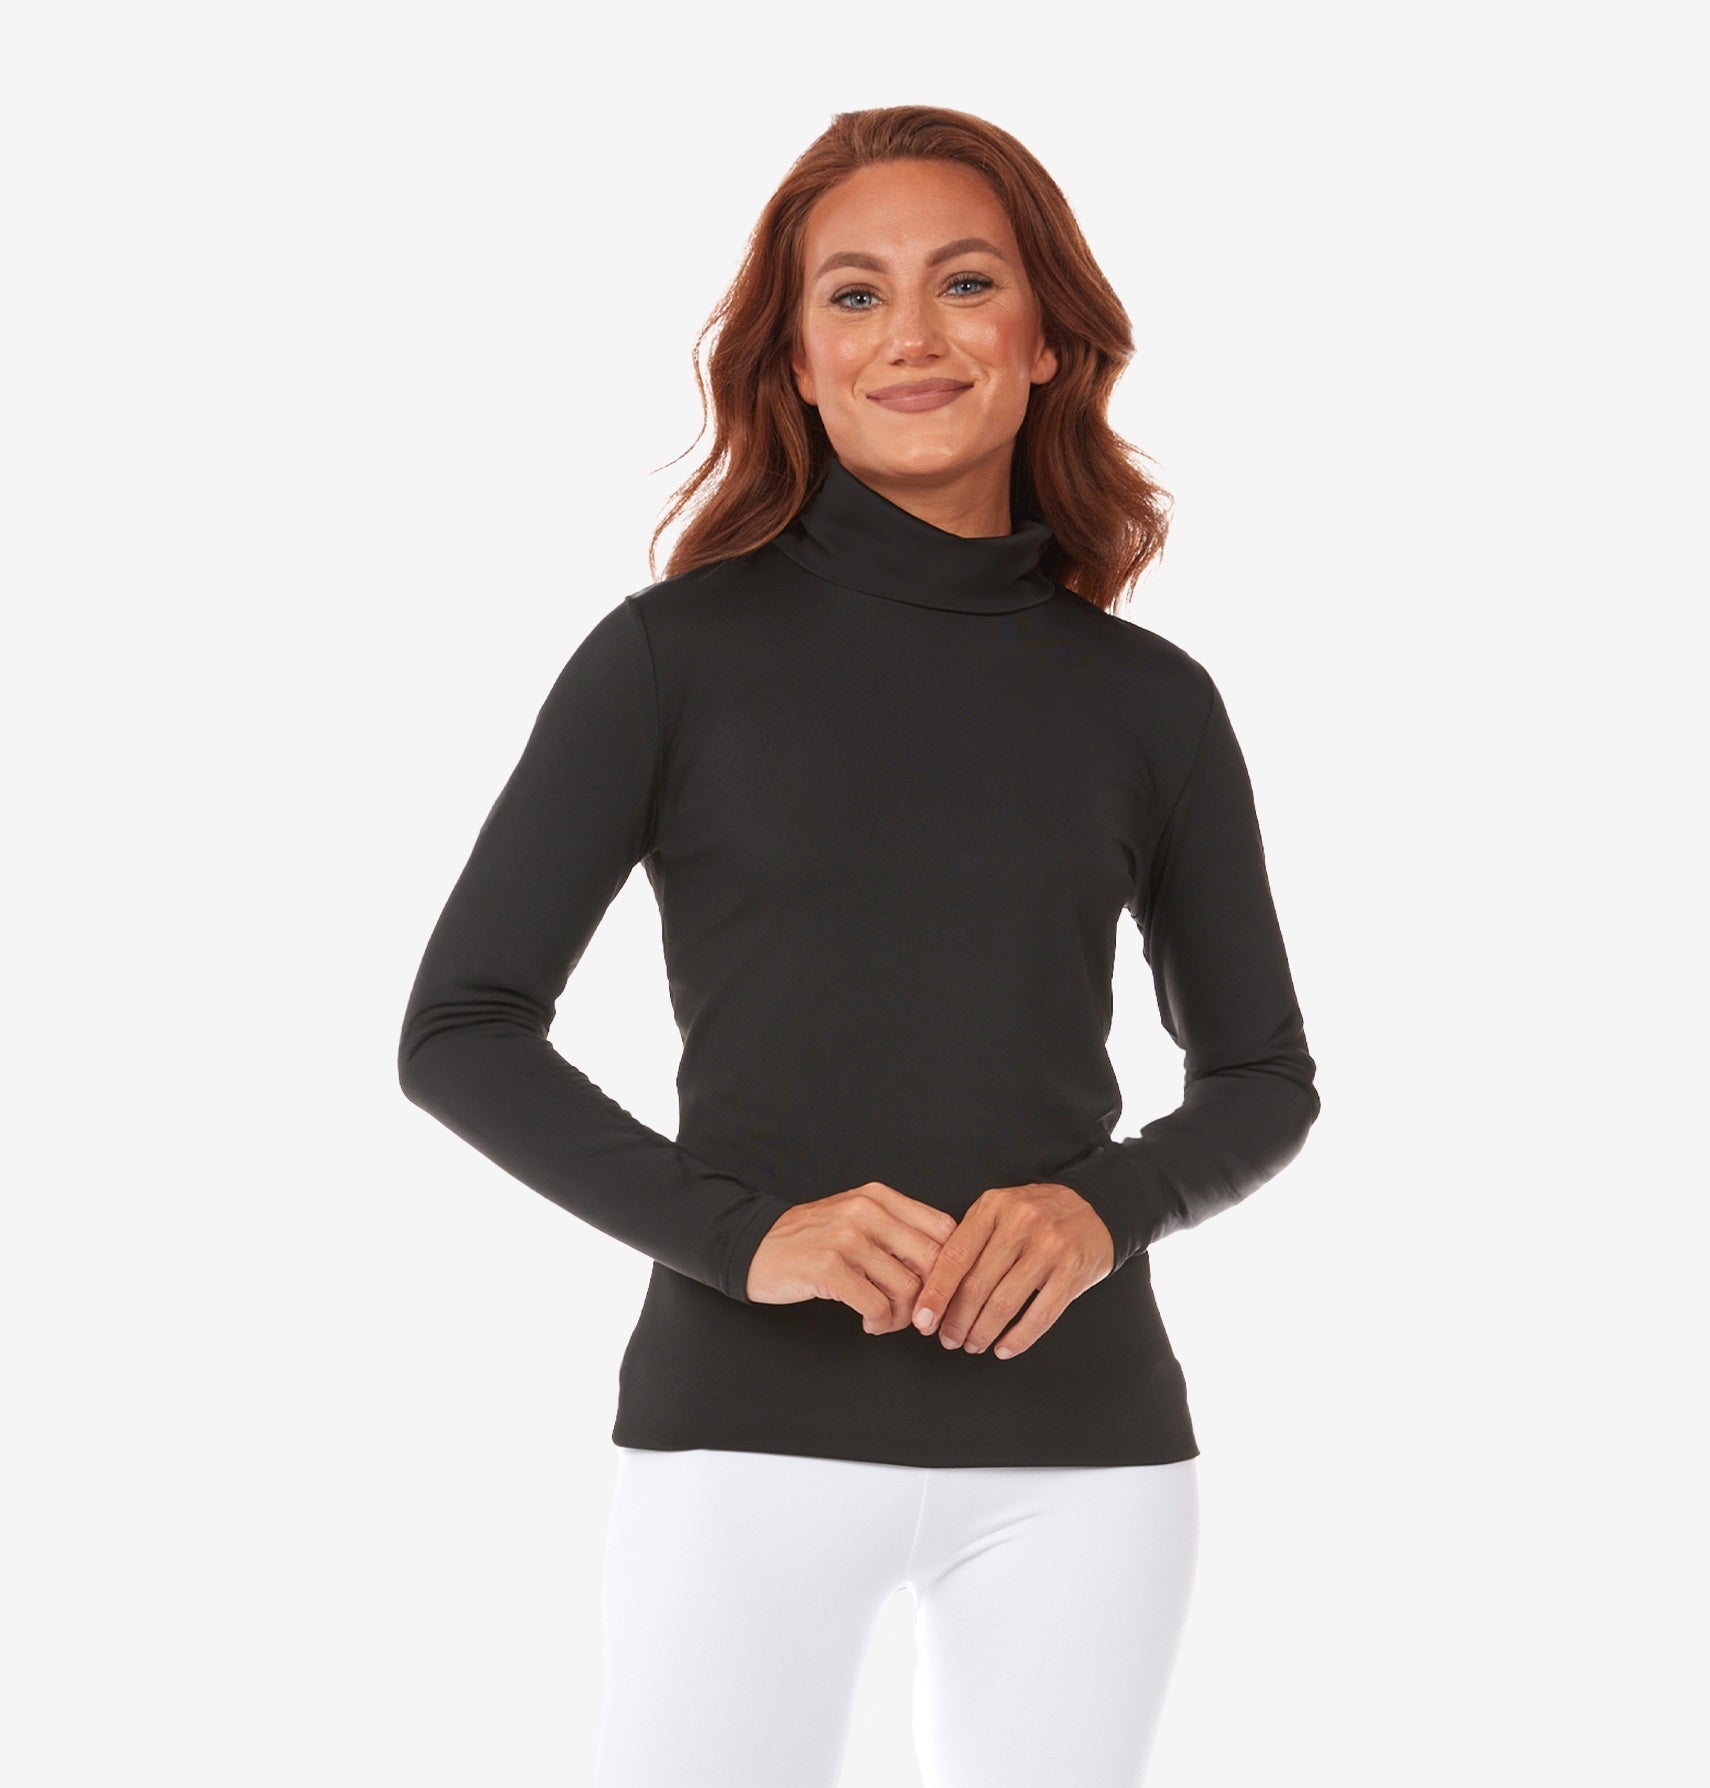 Thermajane Thermal Shirts for Women Scoop Neck Long Sleeve Winter